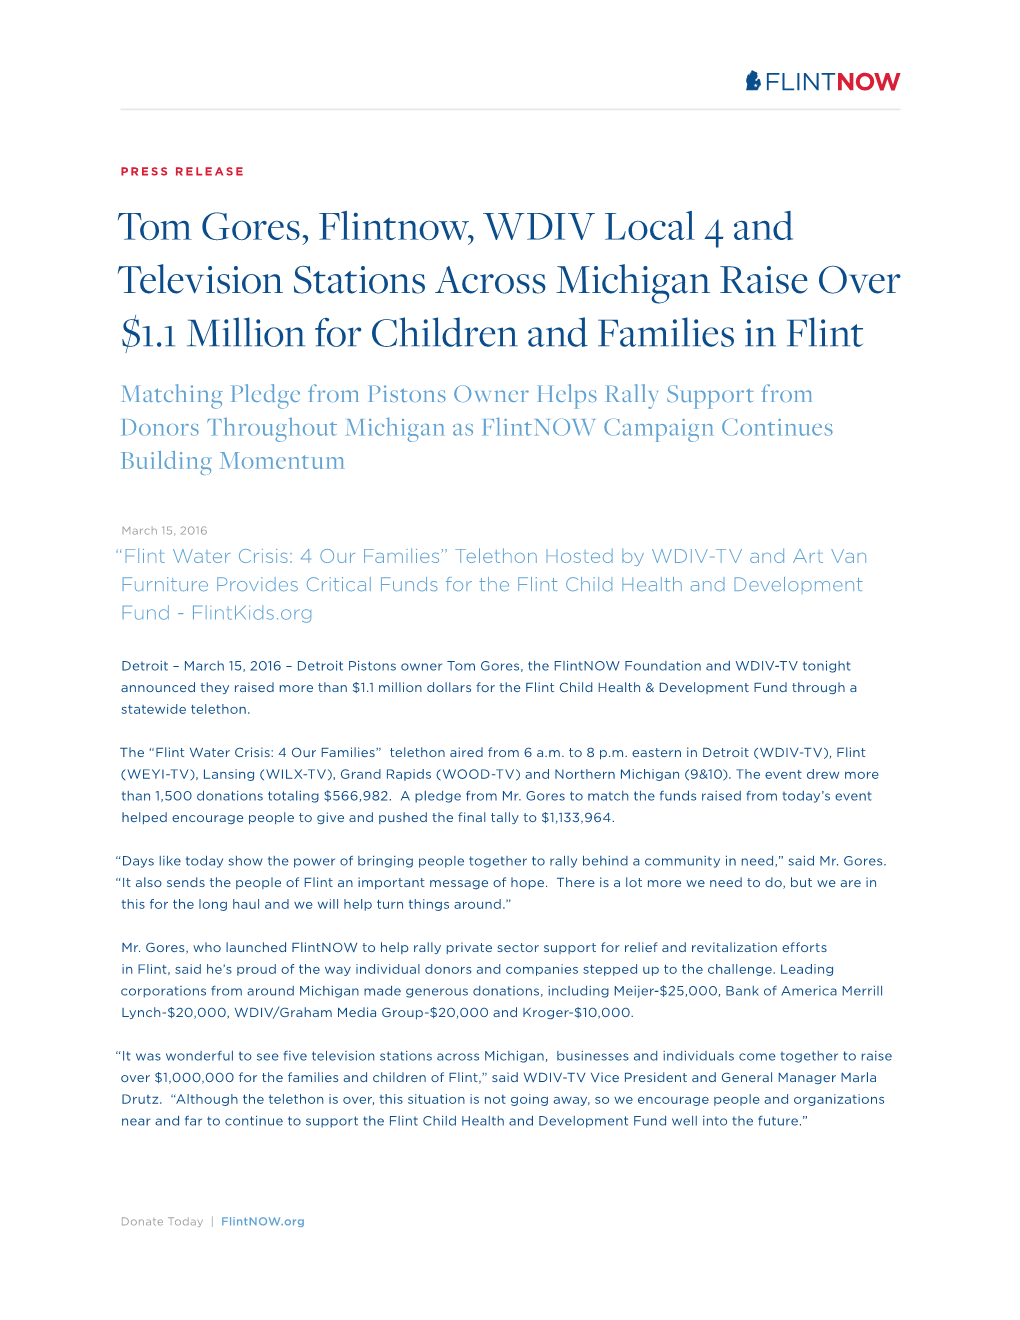 Tom Gores, Flintnow, WDIV Local 4 and Television Stations Across Michigan Raise Over $1.1 Million for Children and Families in F